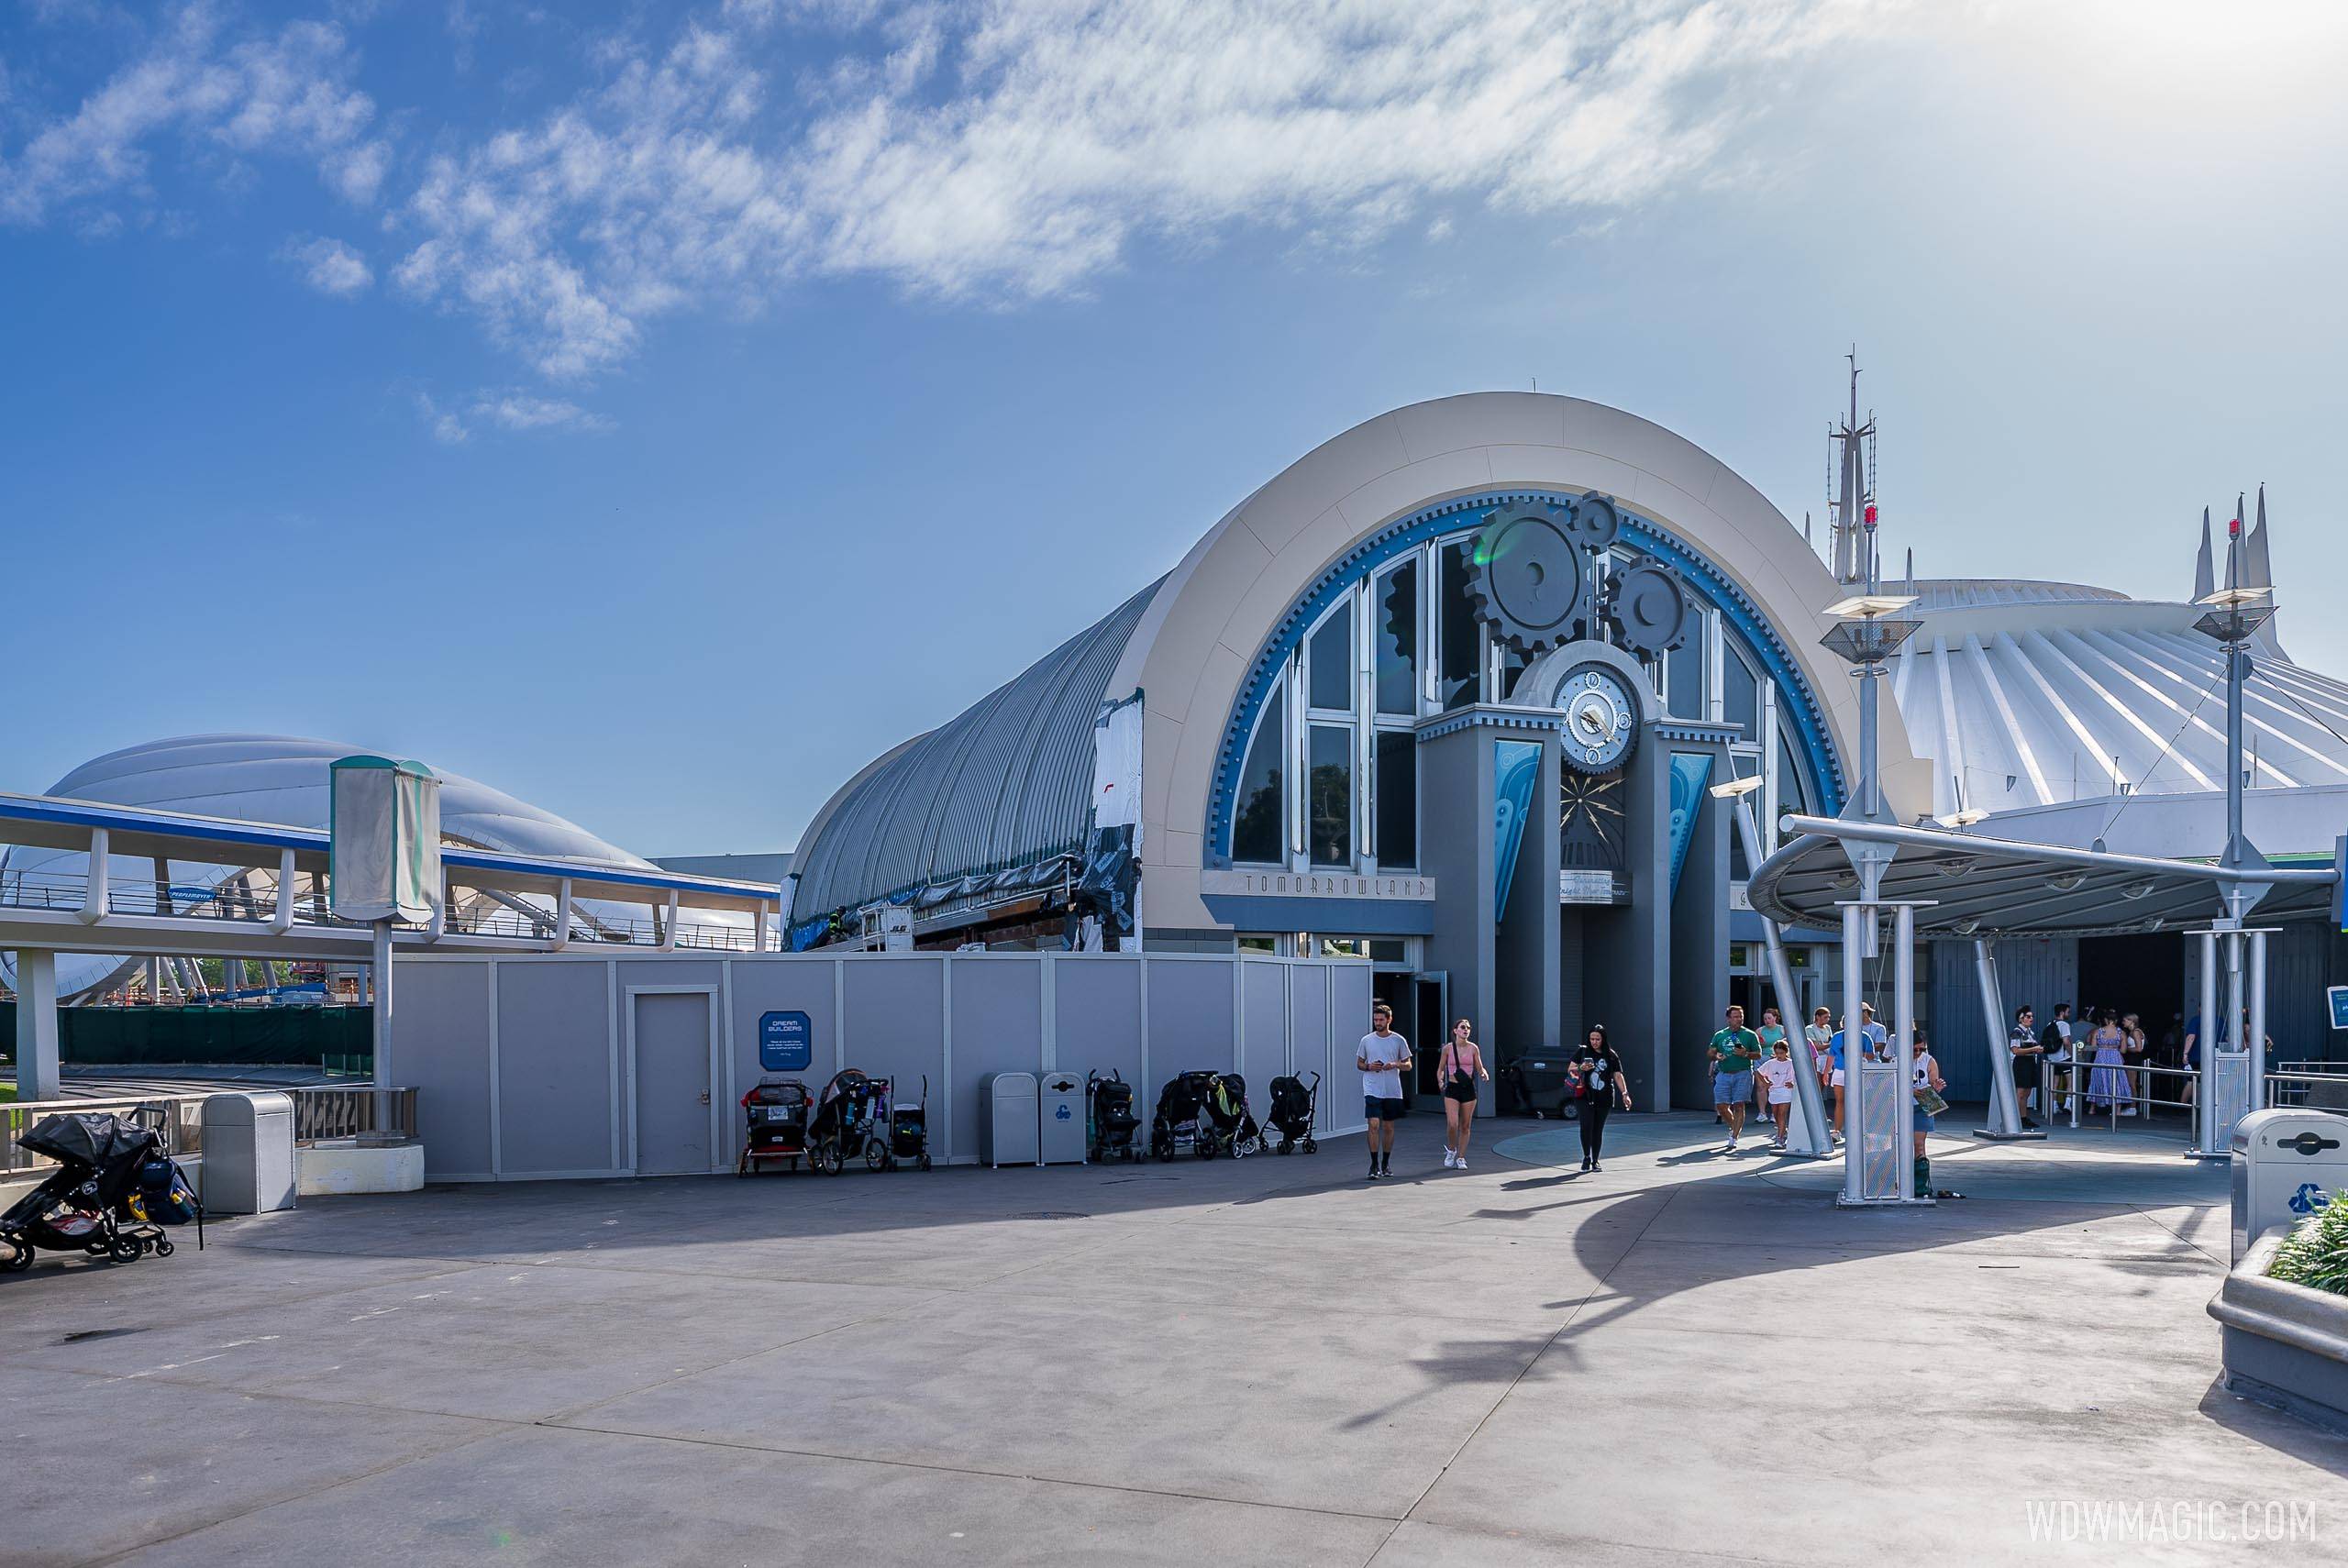 Tomorrowland Light and Power Co. is closing to become the exit for TRON Lightcycle Run and Space Mountain